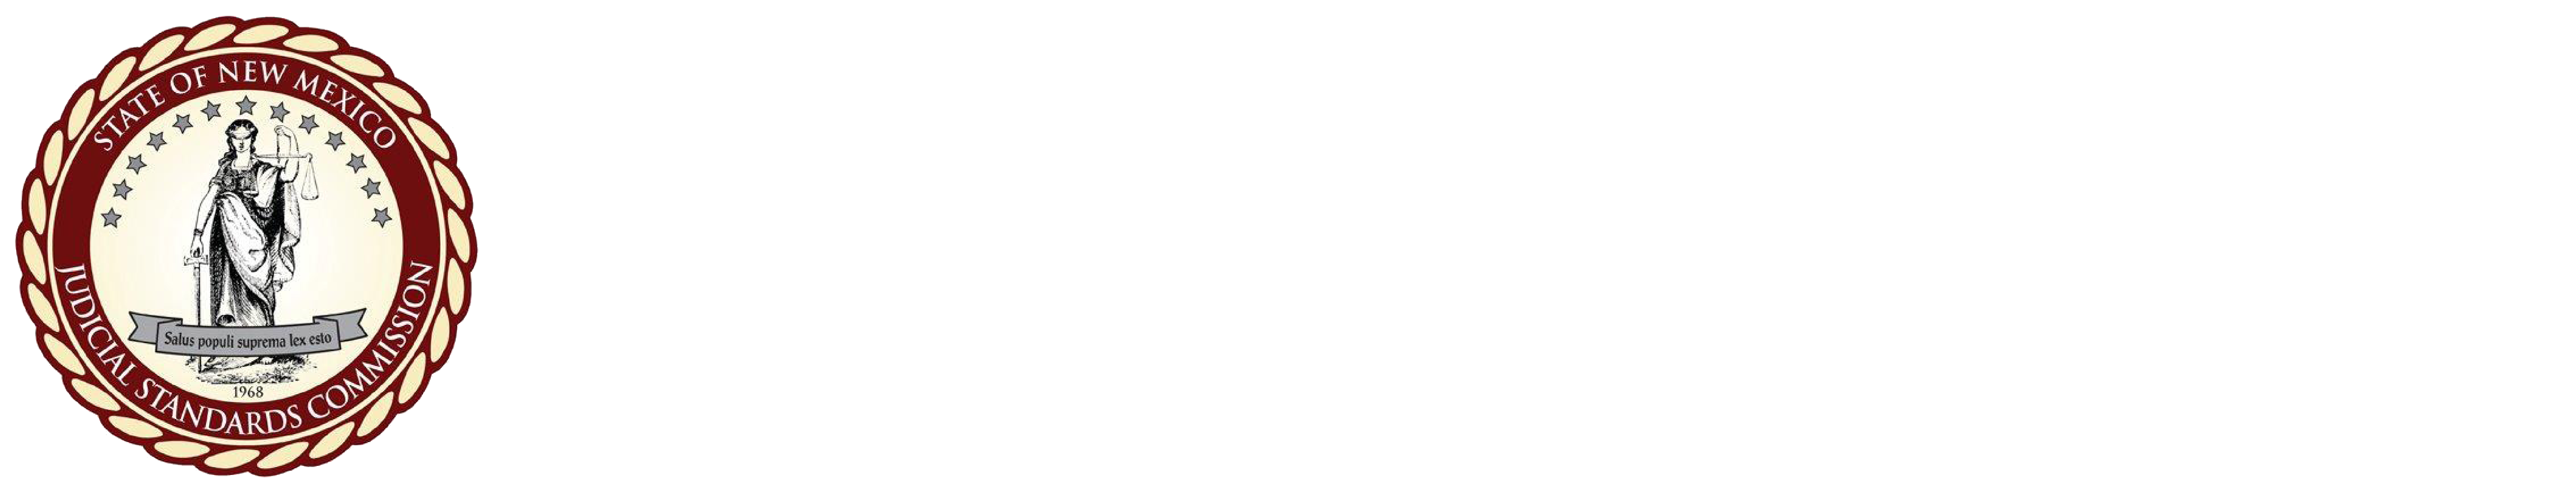 State of New Mexico Judicial Standards Commission logo